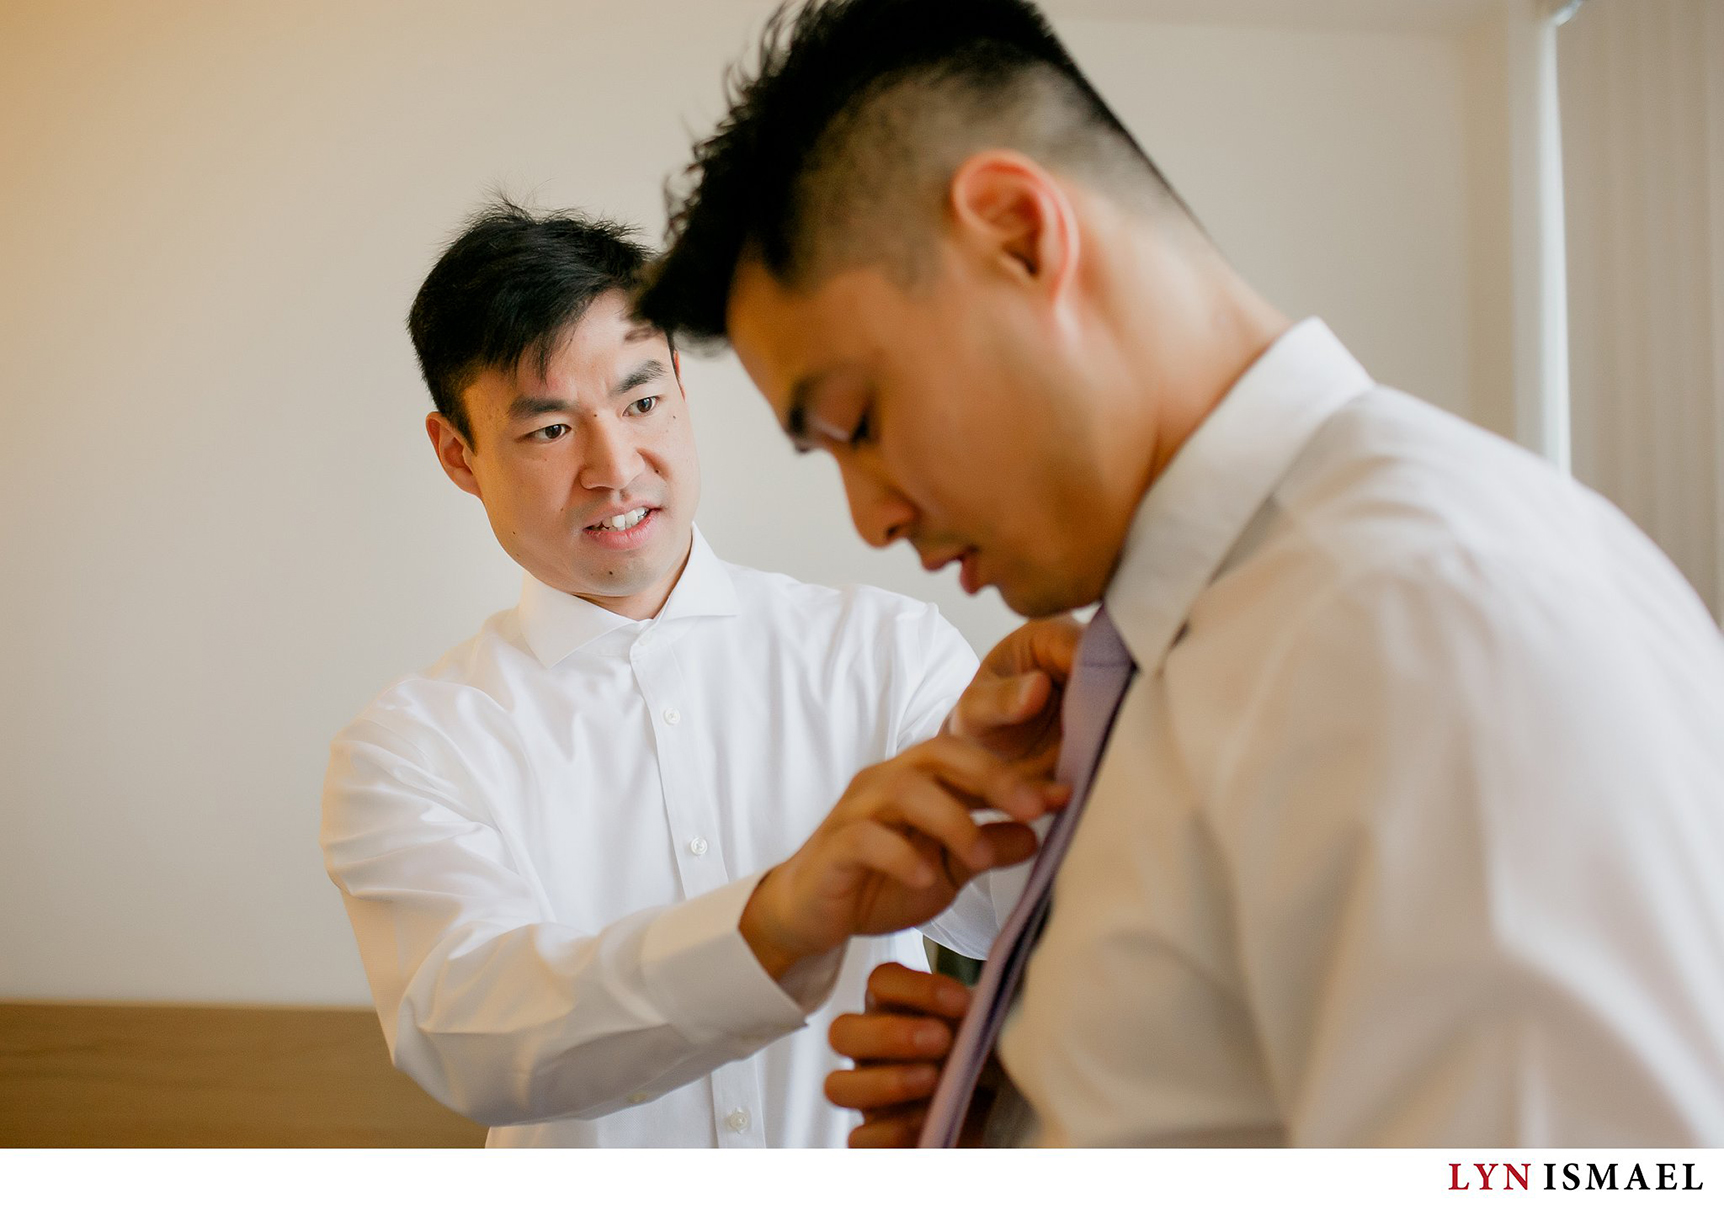 Groom helps his brother with his tie as they got ready